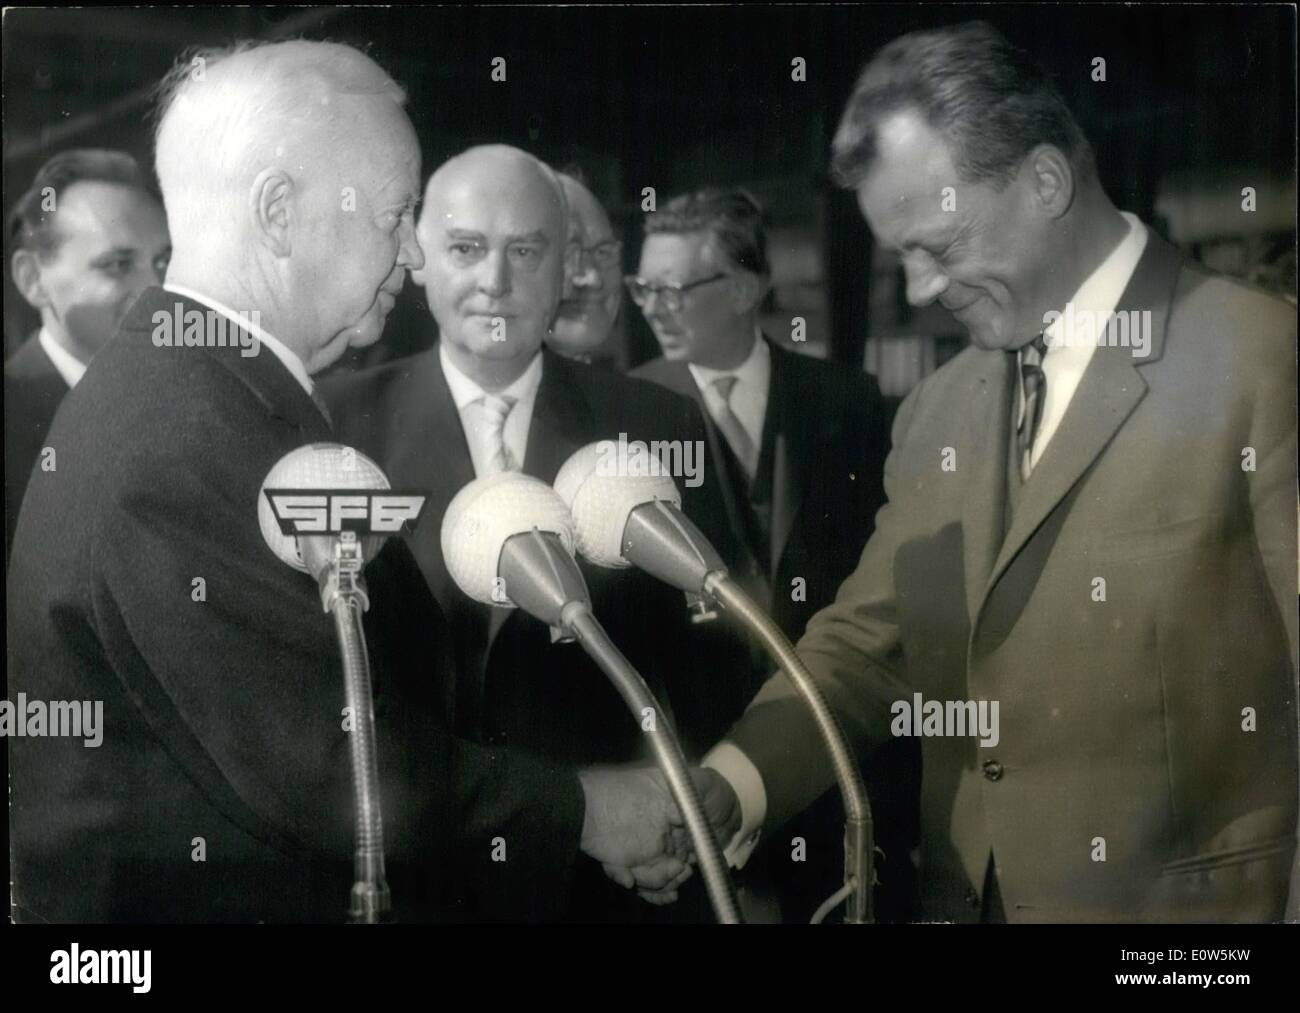 Sep. 09, 1961 - Federal President Luebke in Berlin: Federal President Dr. Heinrich Luebke (left) arrived in Berlin today with a Stock Photo